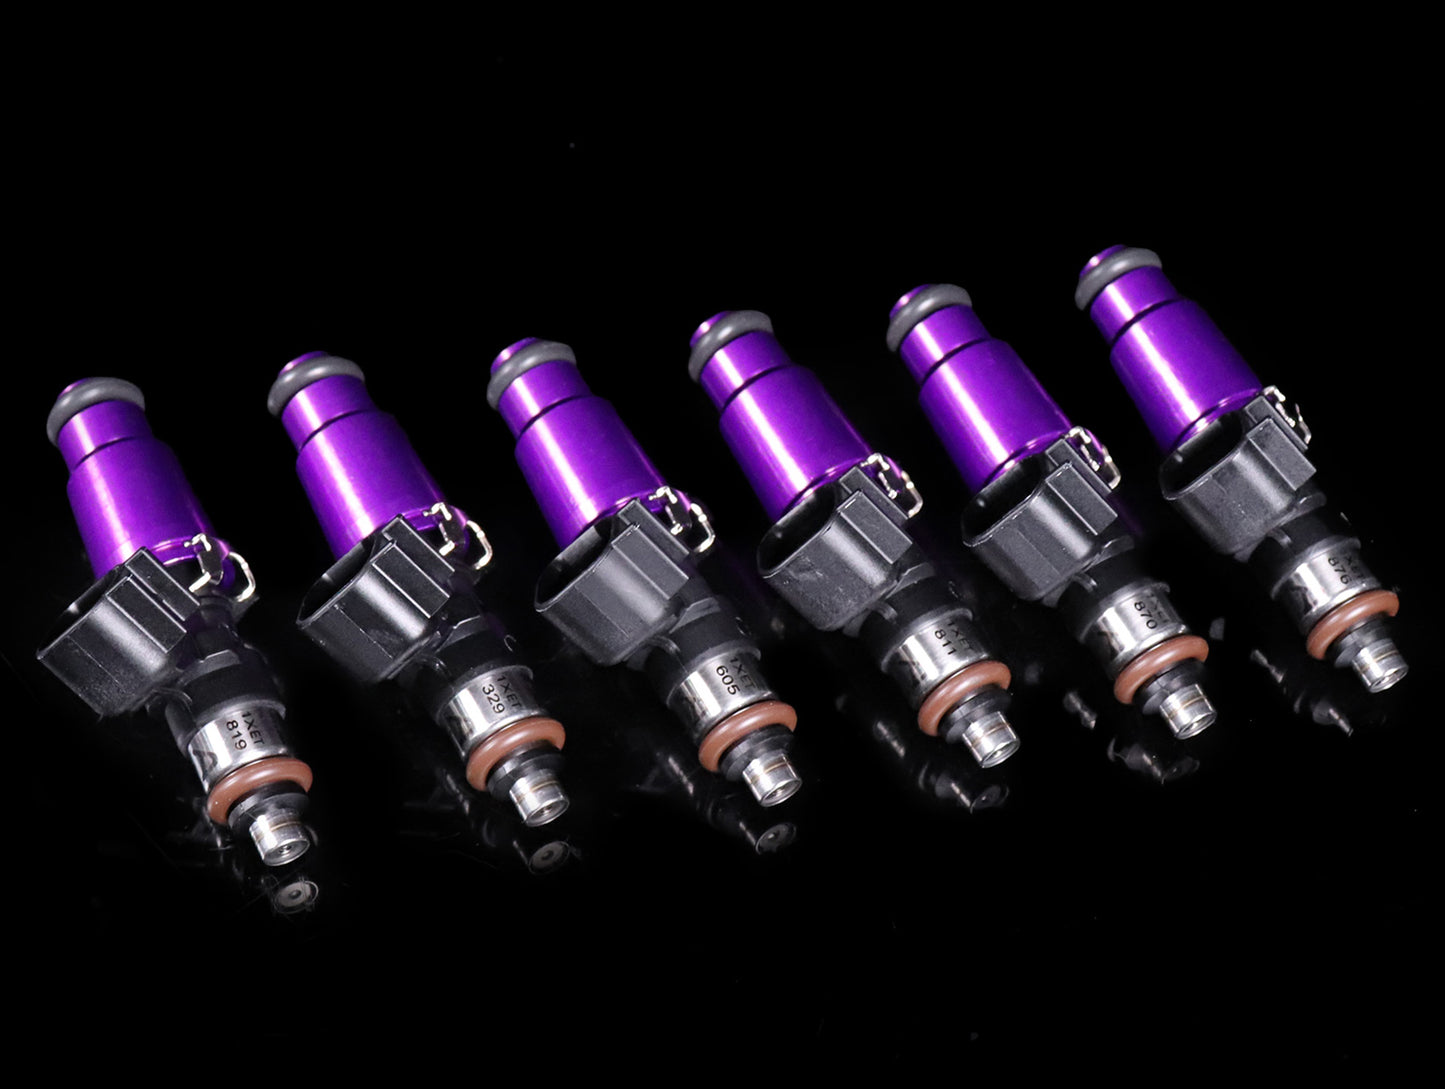 Injector Dynamics 1050 XDS Fuel Injector Kit - Acura